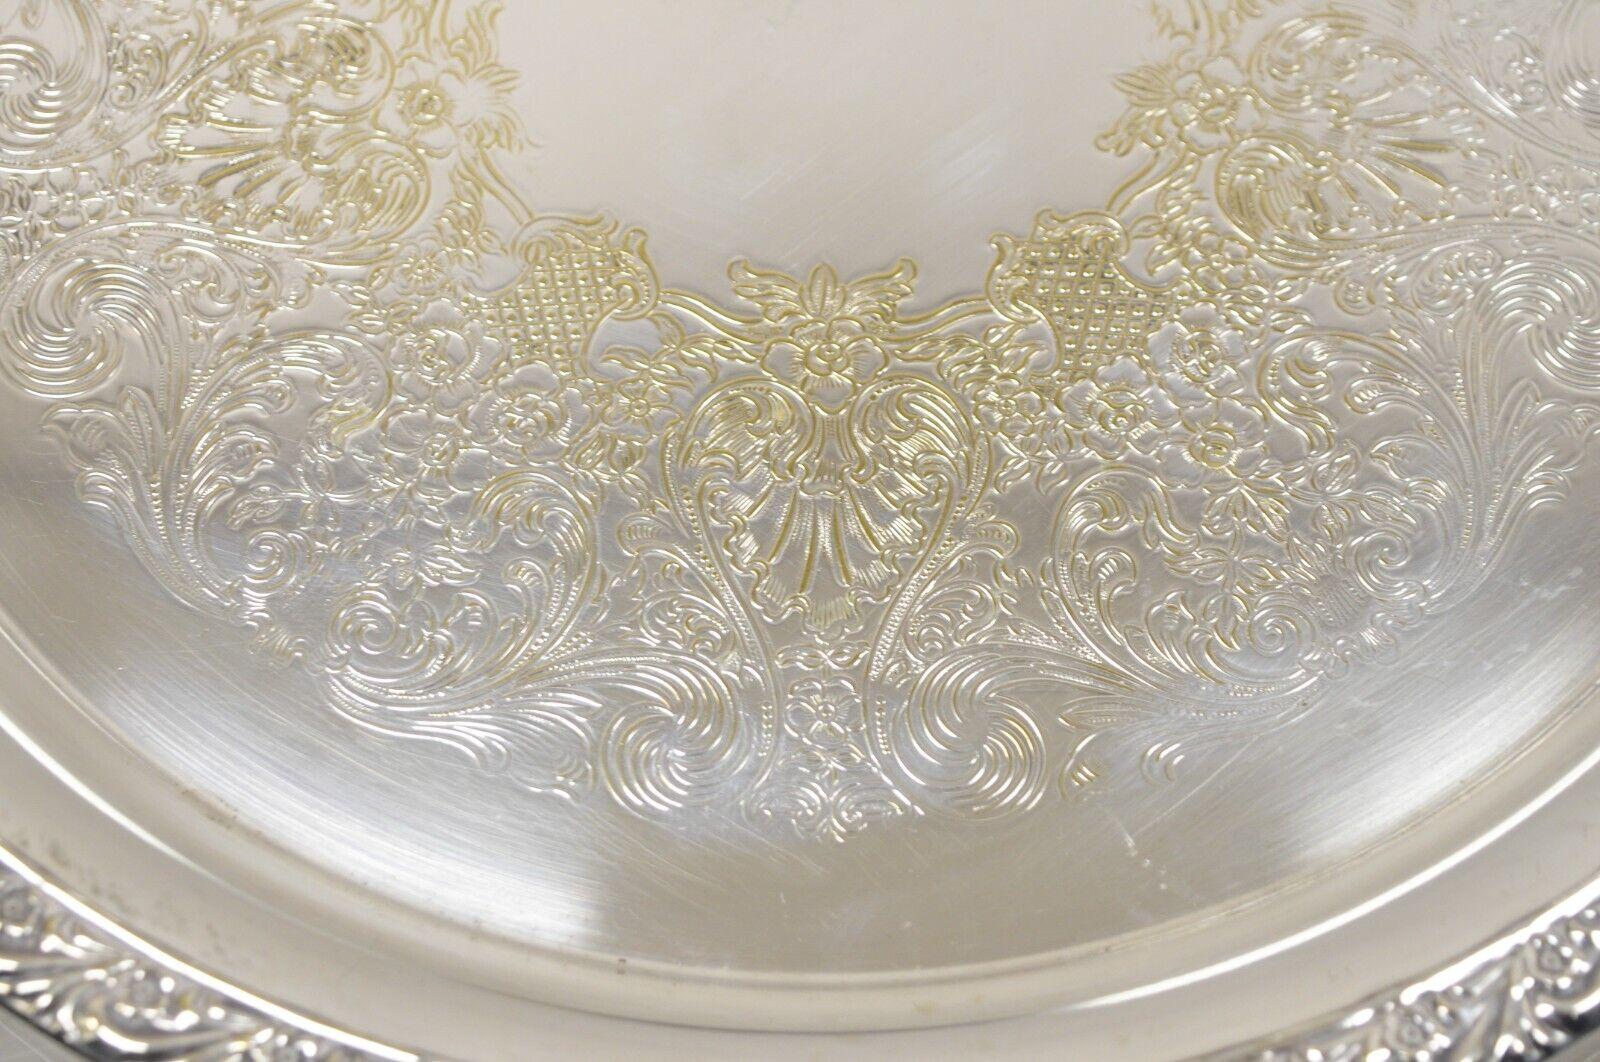 WM Rogers 771 Silver Plated Round Etched Serving Platter Tray In Good Condition For Sale In Philadelphia, PA